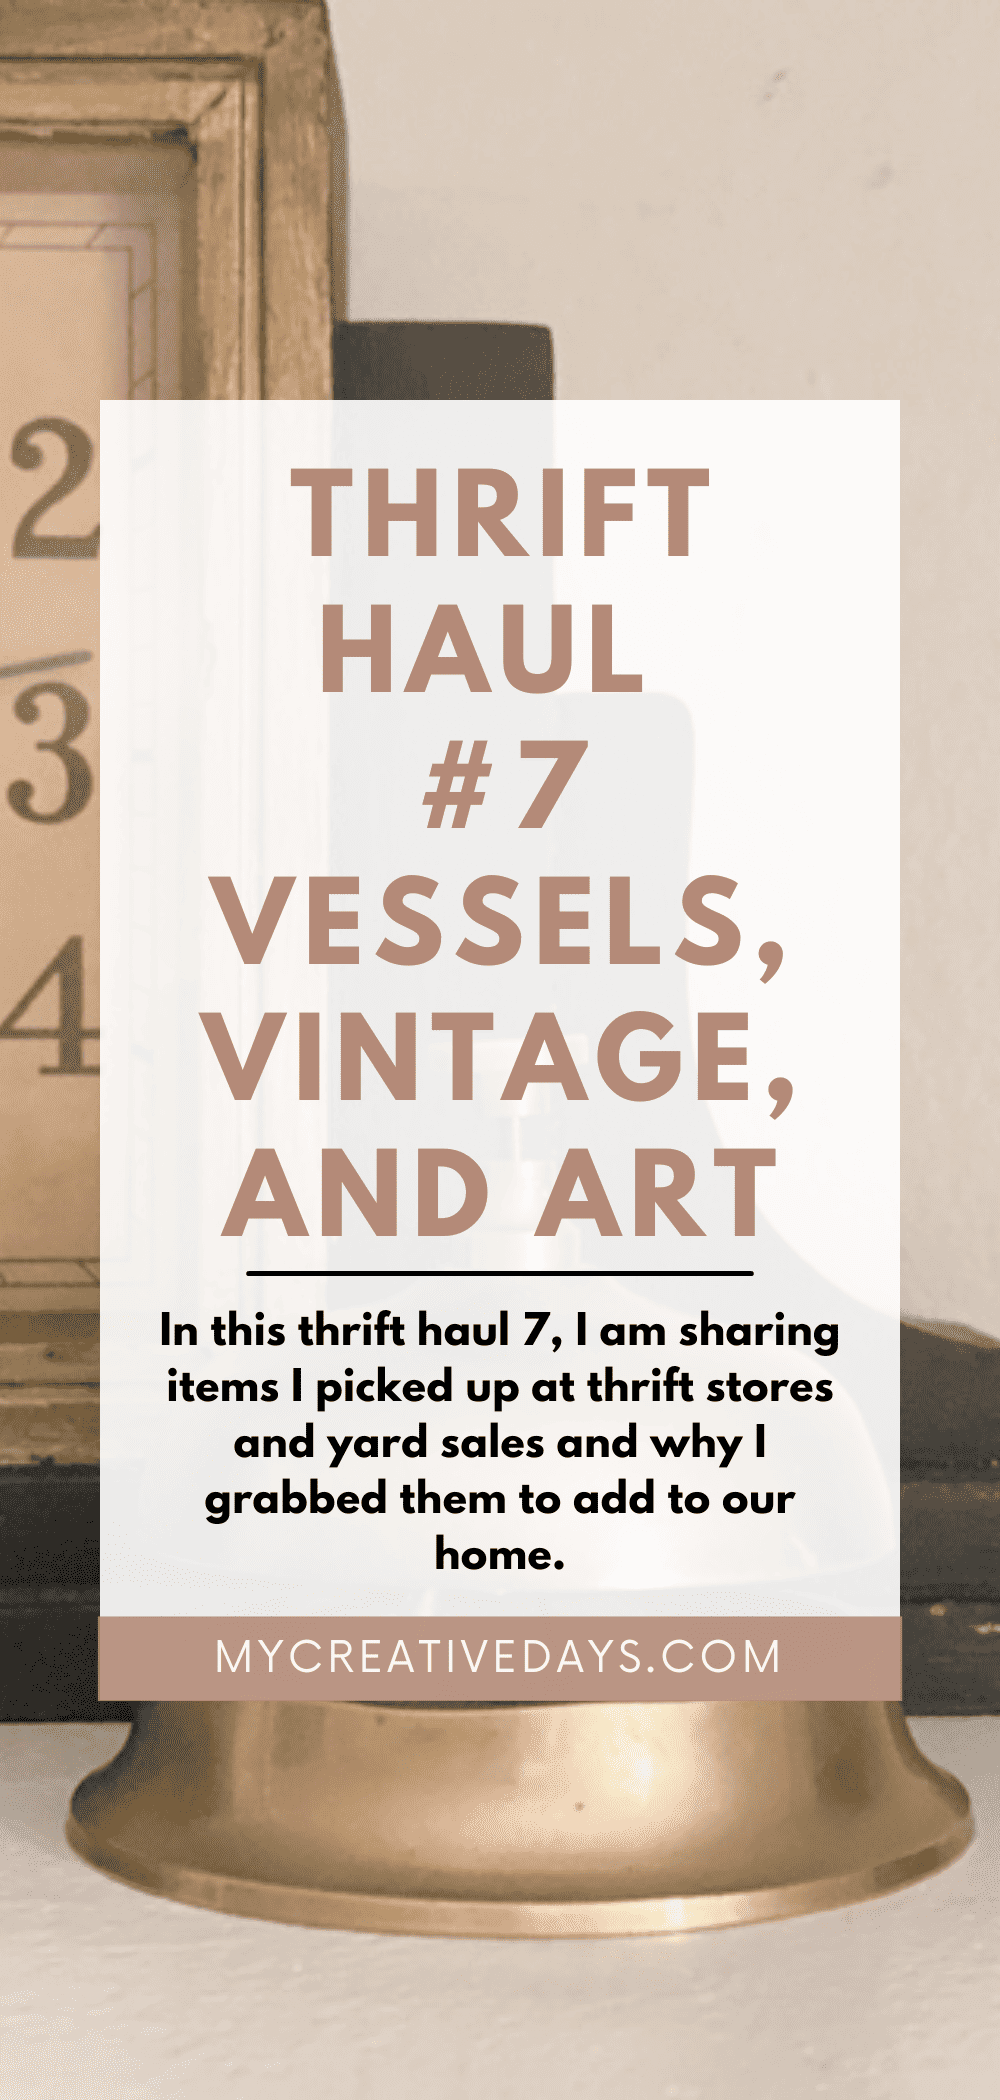 In this thrift haul 7, I am sharing items I picked up at thrift stores and yard sales and why I grabbed them to add to our home.